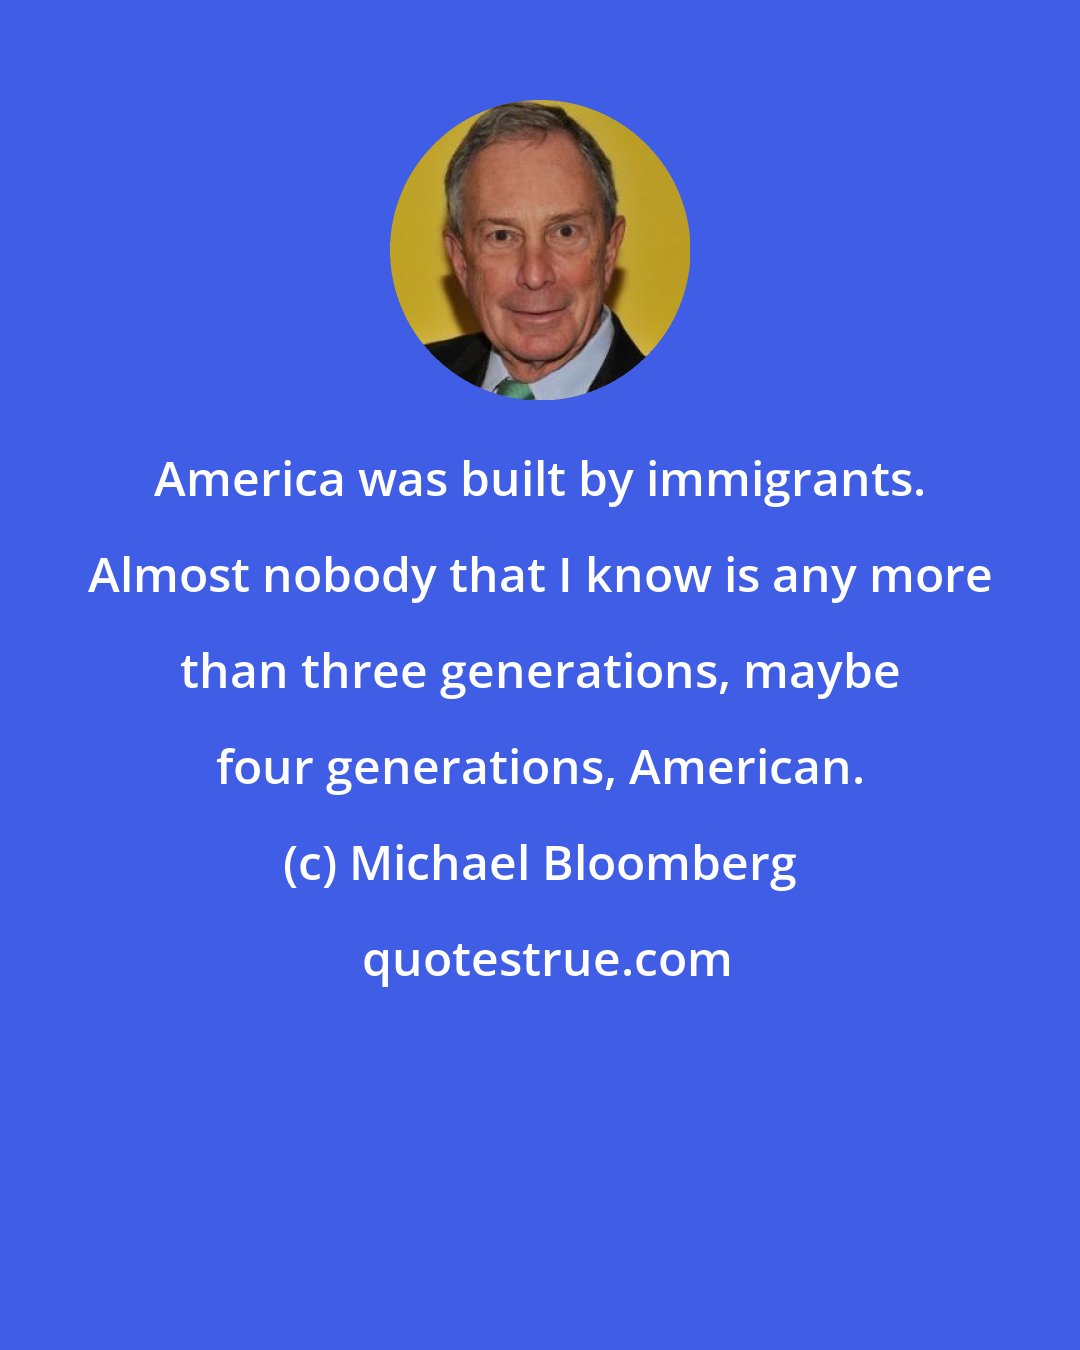 Michael Bloomberg: America was built by immigrants. Almost nobody that I know is any more than three generations, maybe four generations, American.